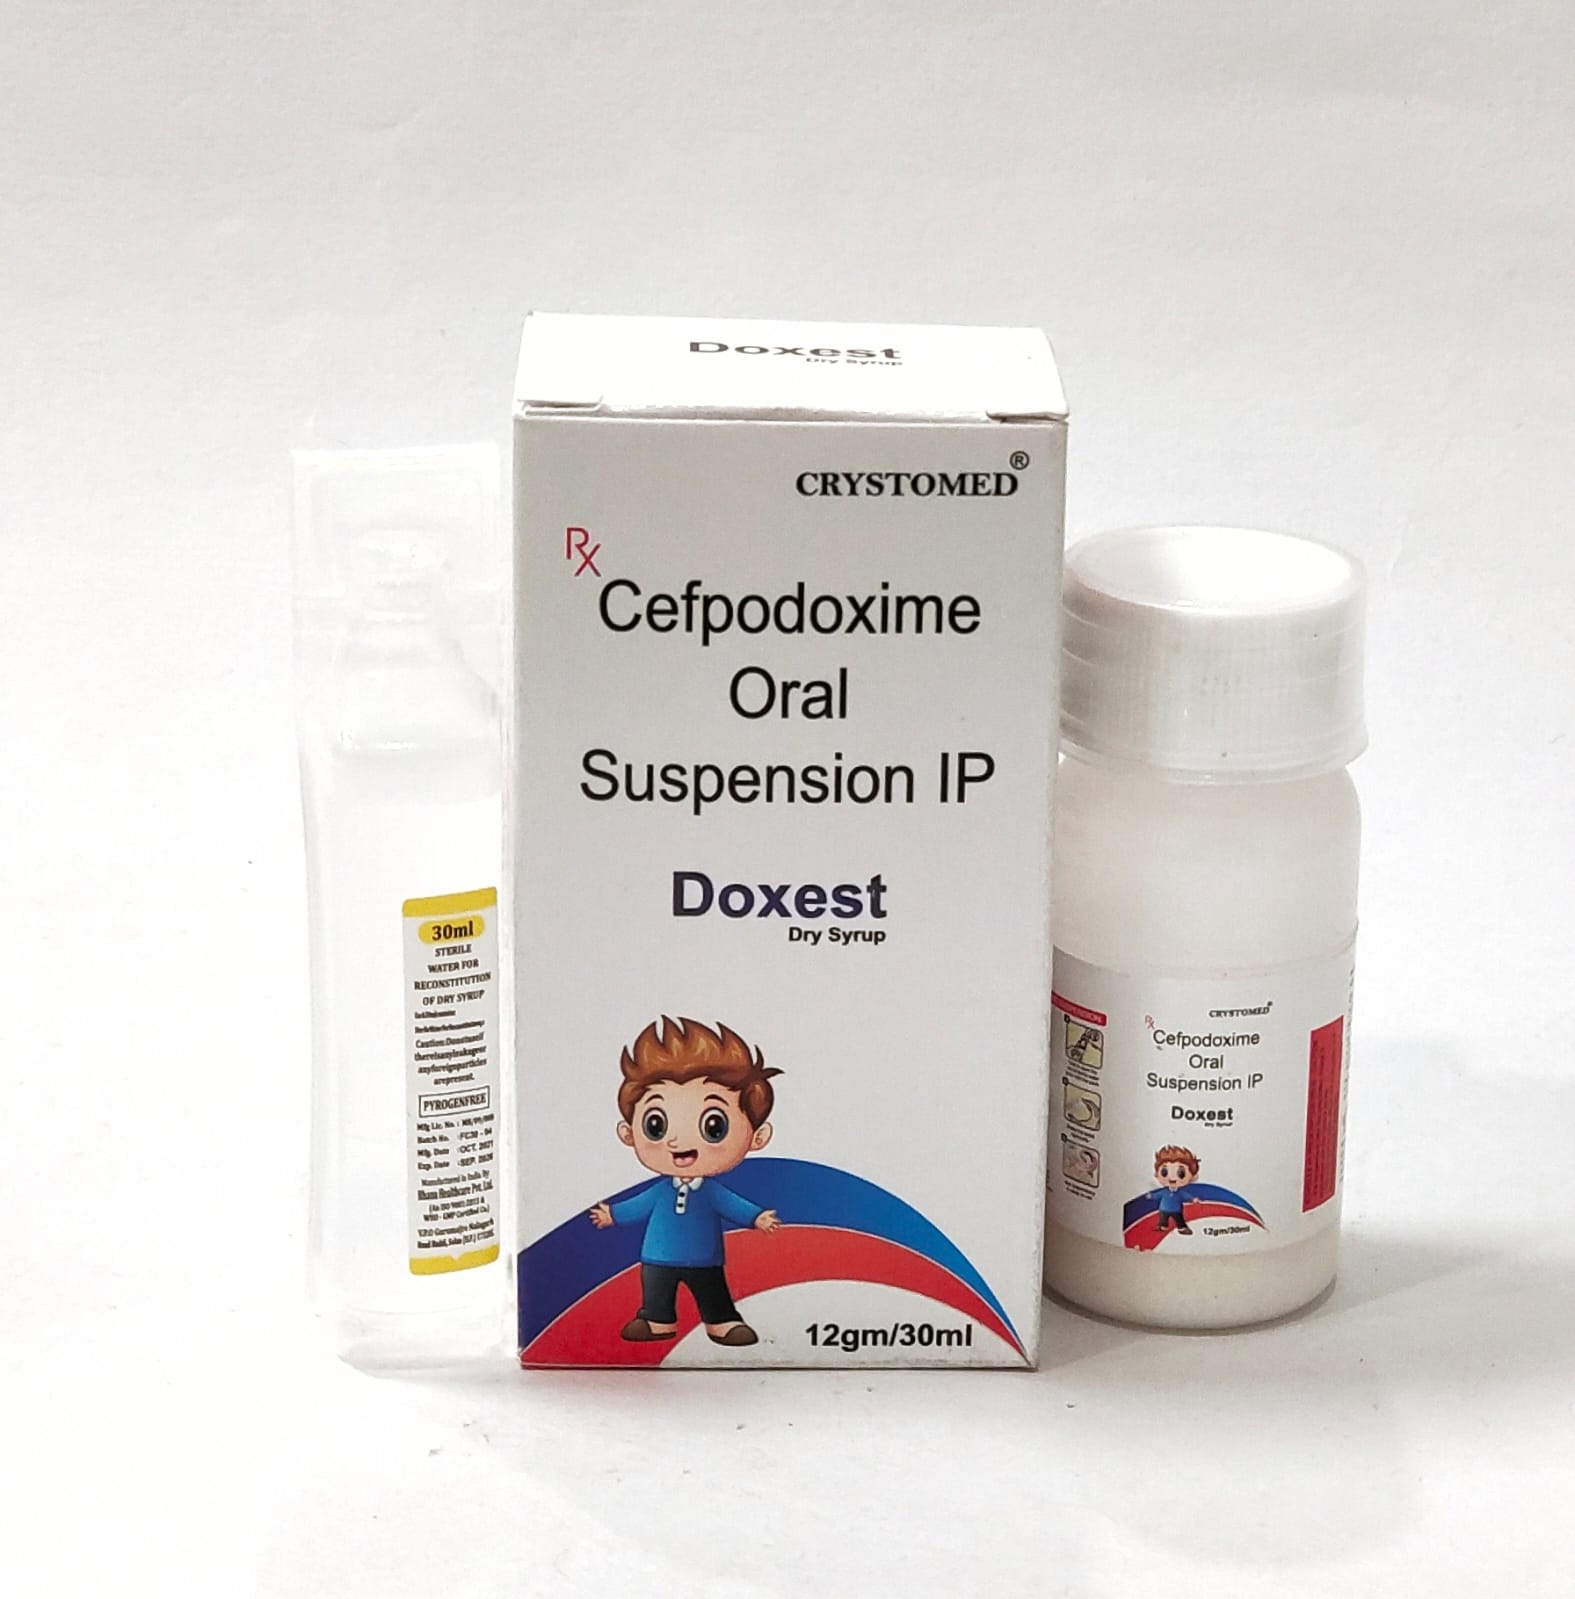 CRYSTOMED Cefpodoxime Oral Suspension IP